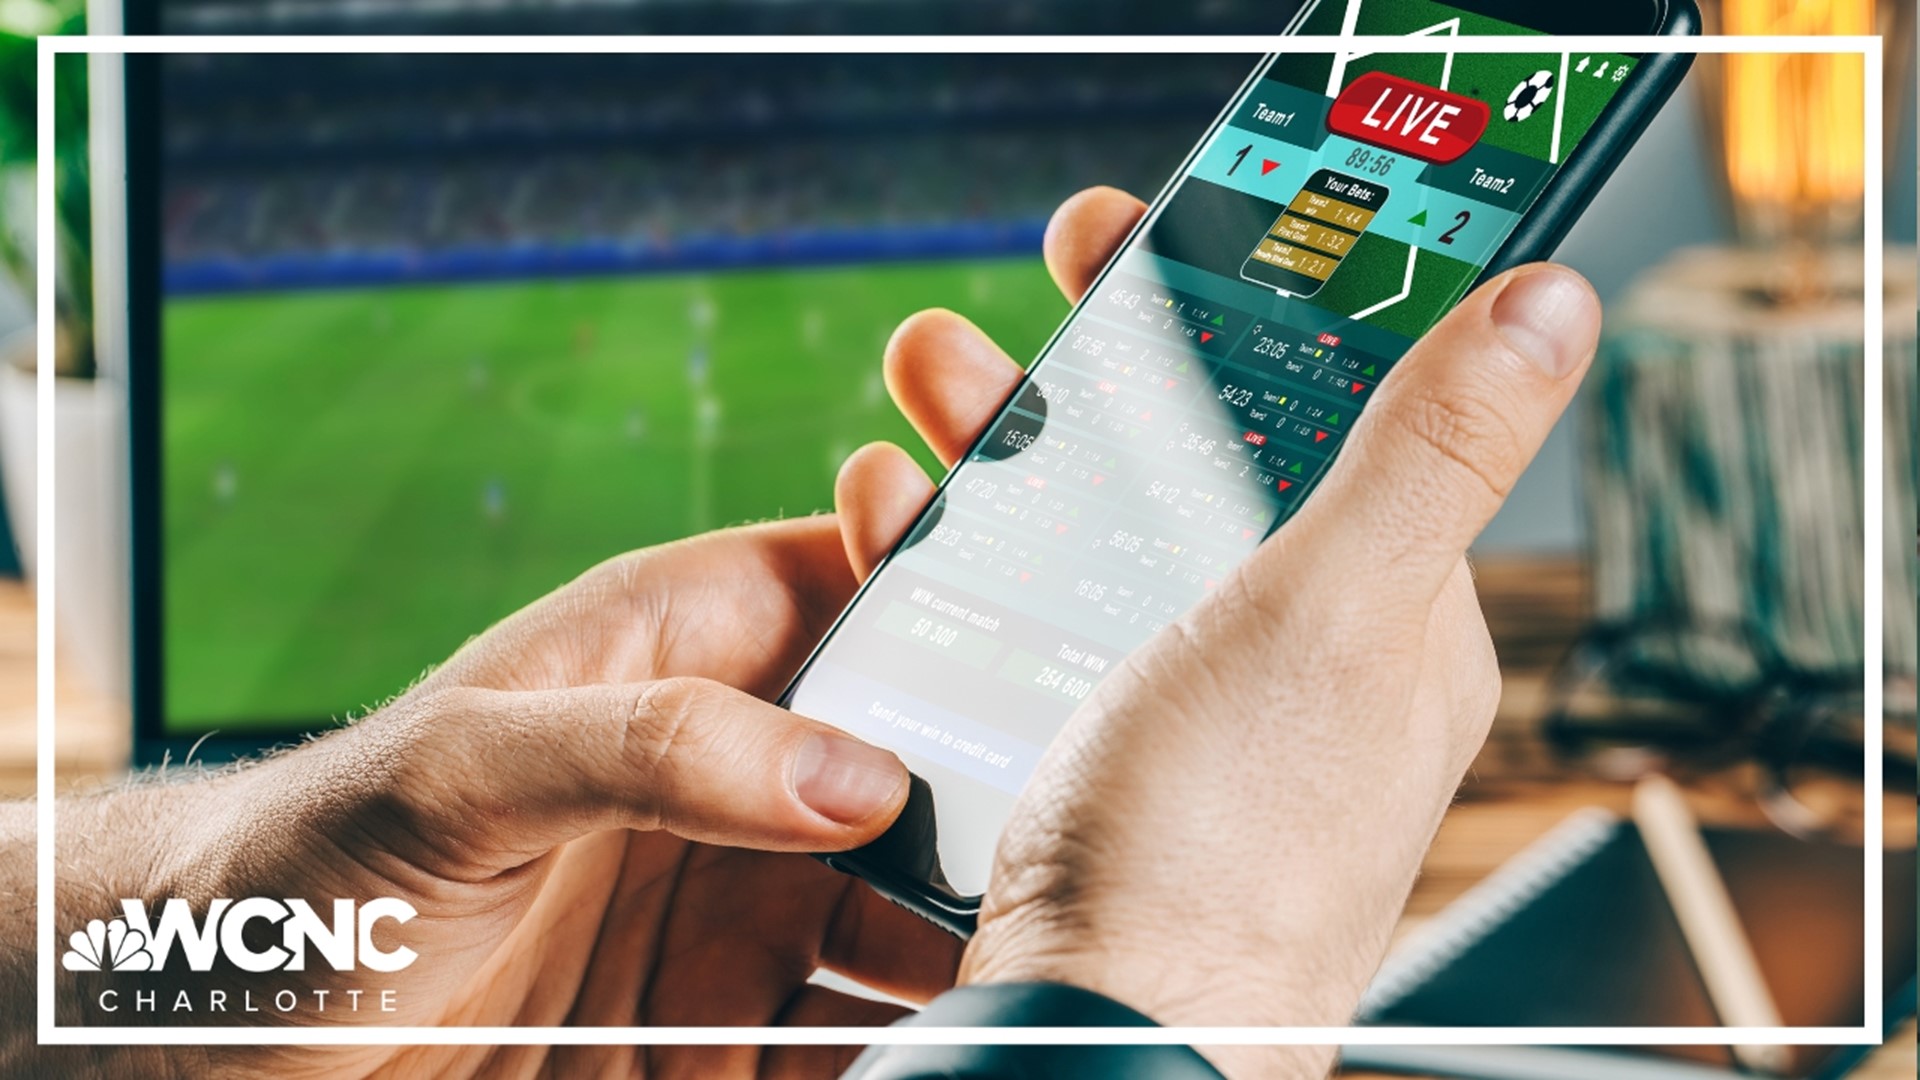 A day after sports betting launched in North Carolina, no major technical issues have been reported as fans begin making live bets on the mobile apps.